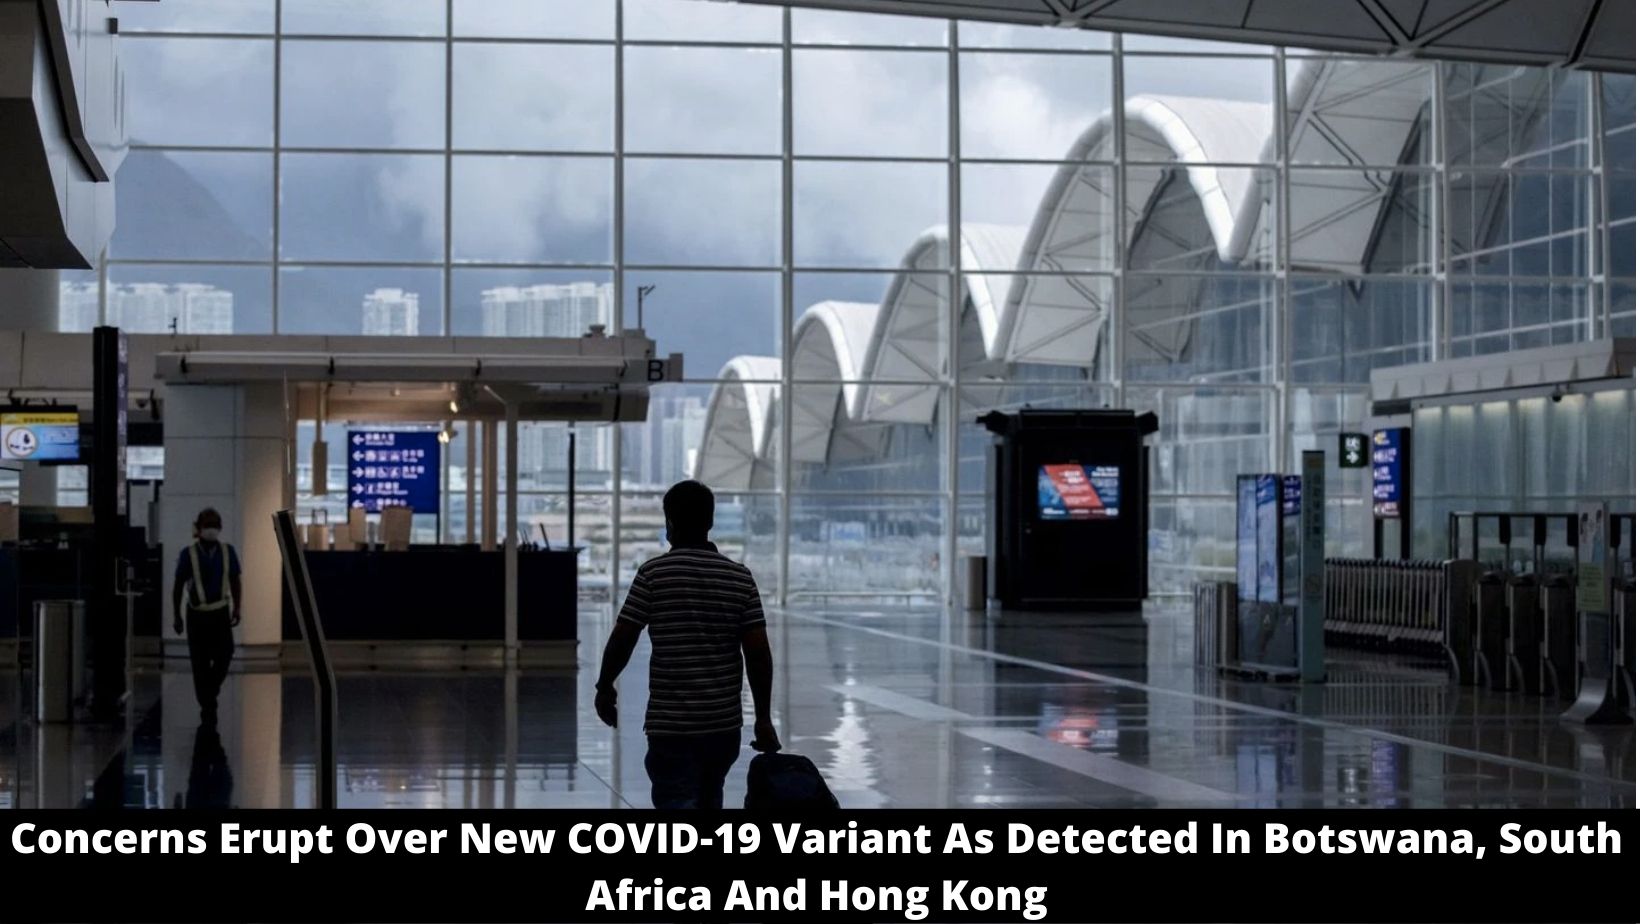 Concerns Erupt Over New COVID-19 Variant As Detected In Botswana, South Africa And Hong Kong